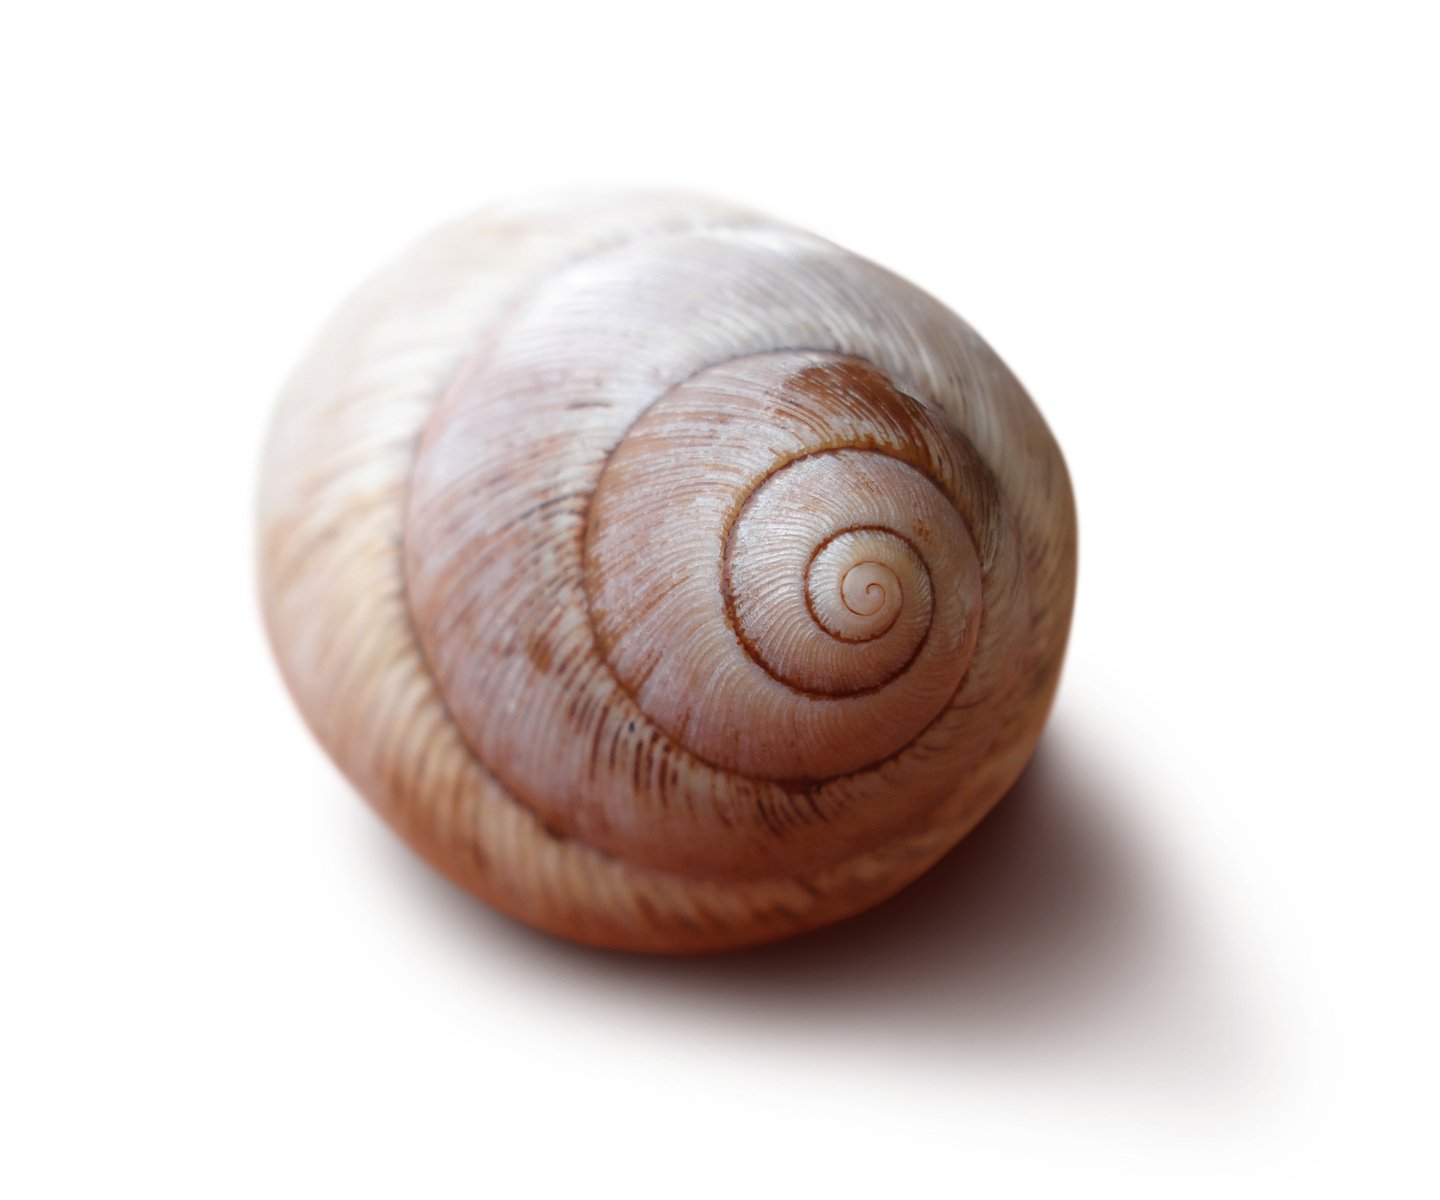 a small brown snail is pographed against a white background